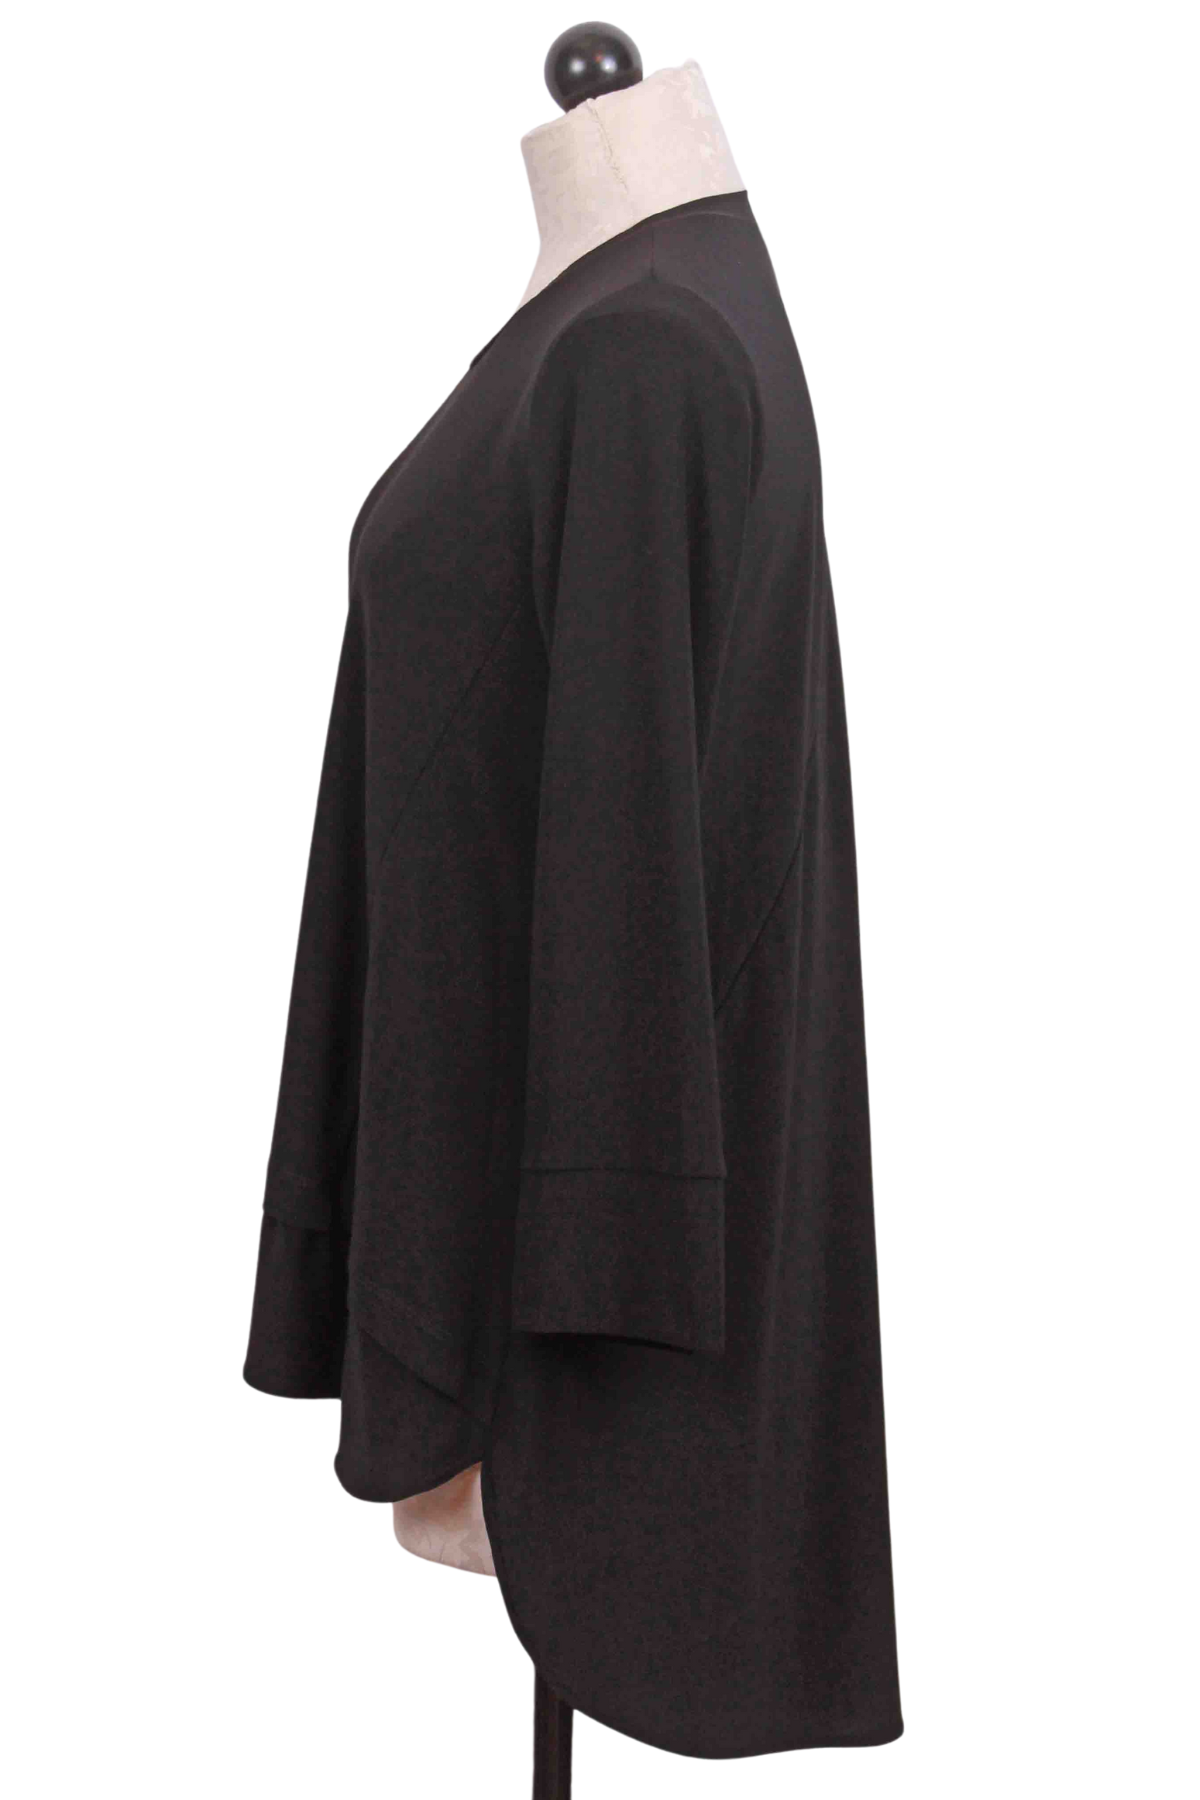 side view of black Top by Reina Lee with Decorative side Zipper on High-Low Hem